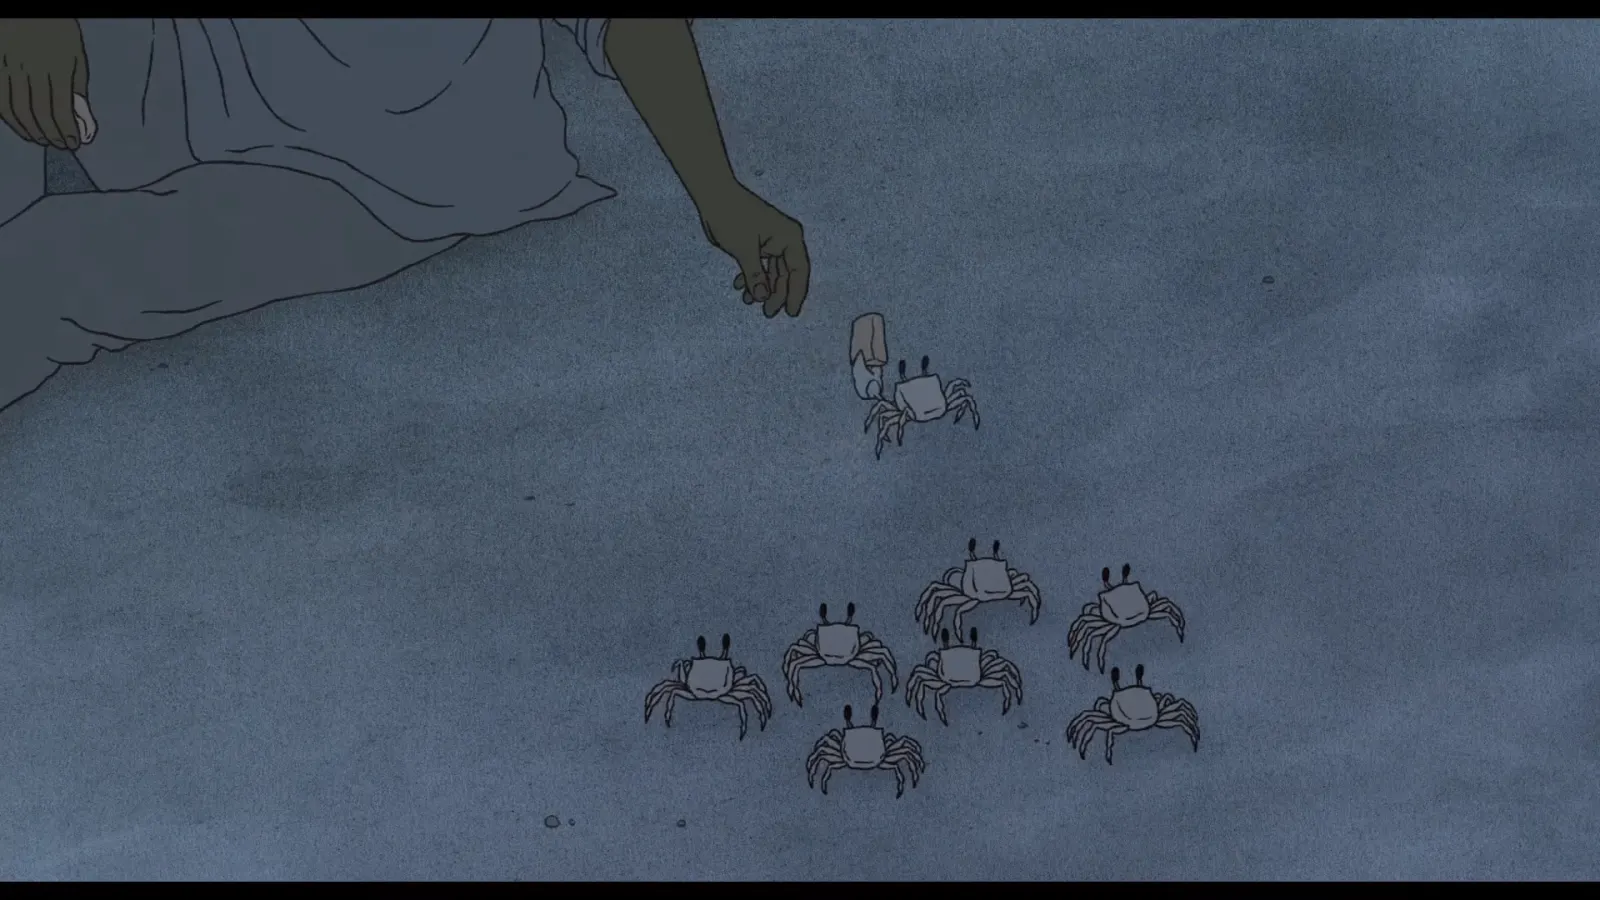 These little crabs are adorable and turn up throughout the film